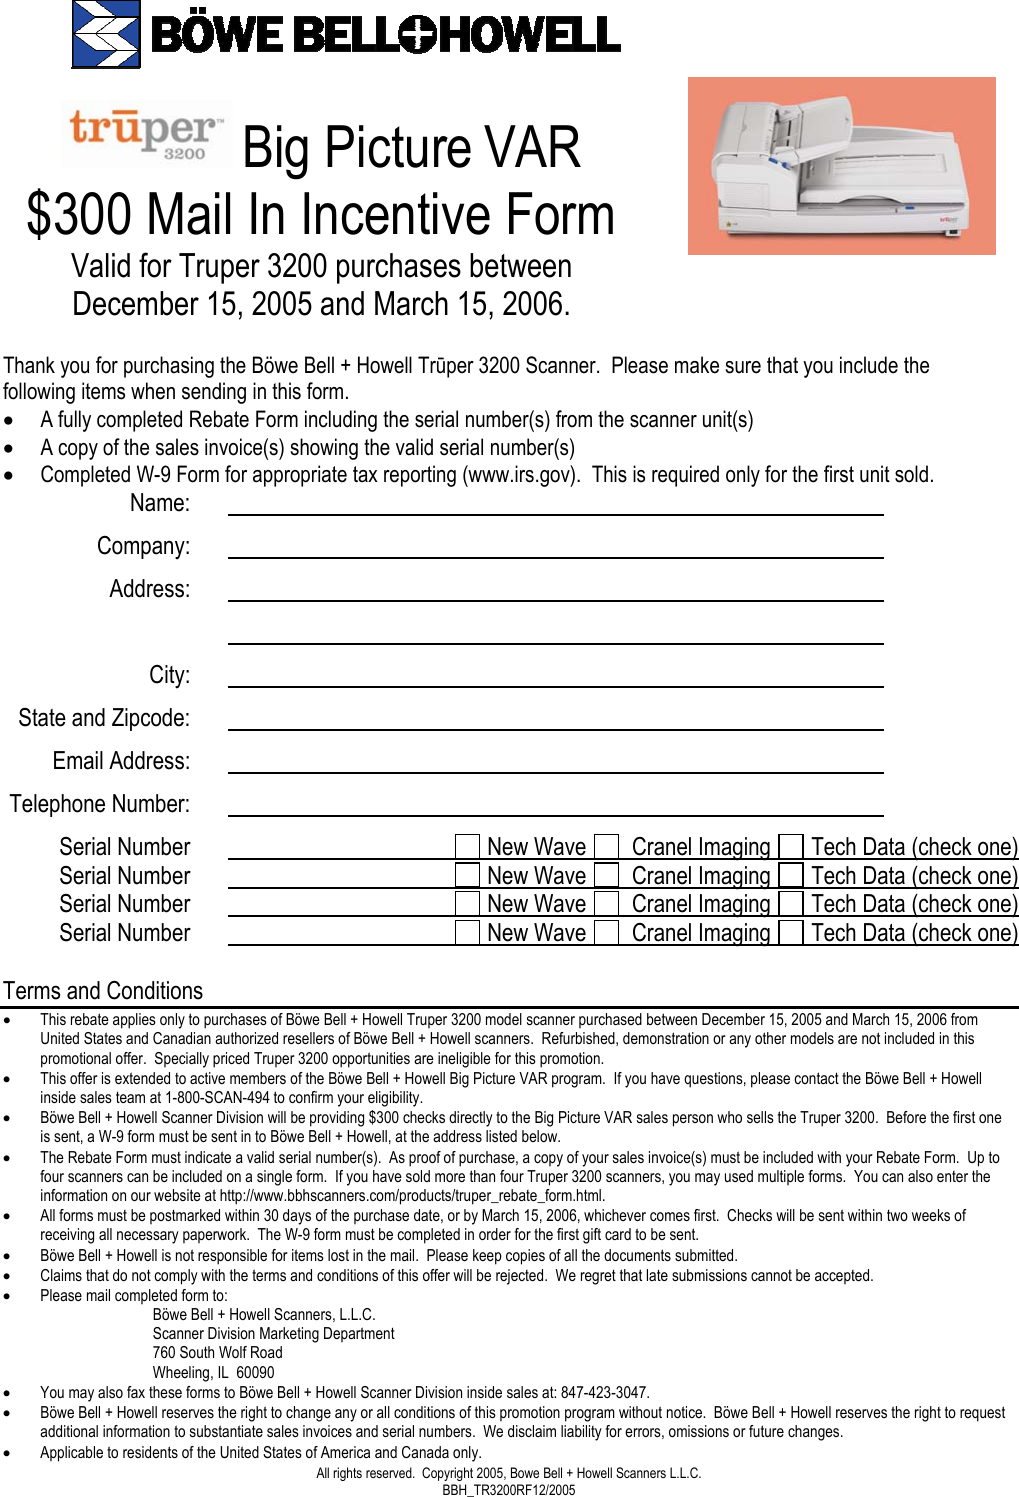 Page 1 of 1 - Bowe-Bell-Plus-Howell Bowe-Bell-Plus-Howell-3200-Users-Manual Truper VAR Rebate Form